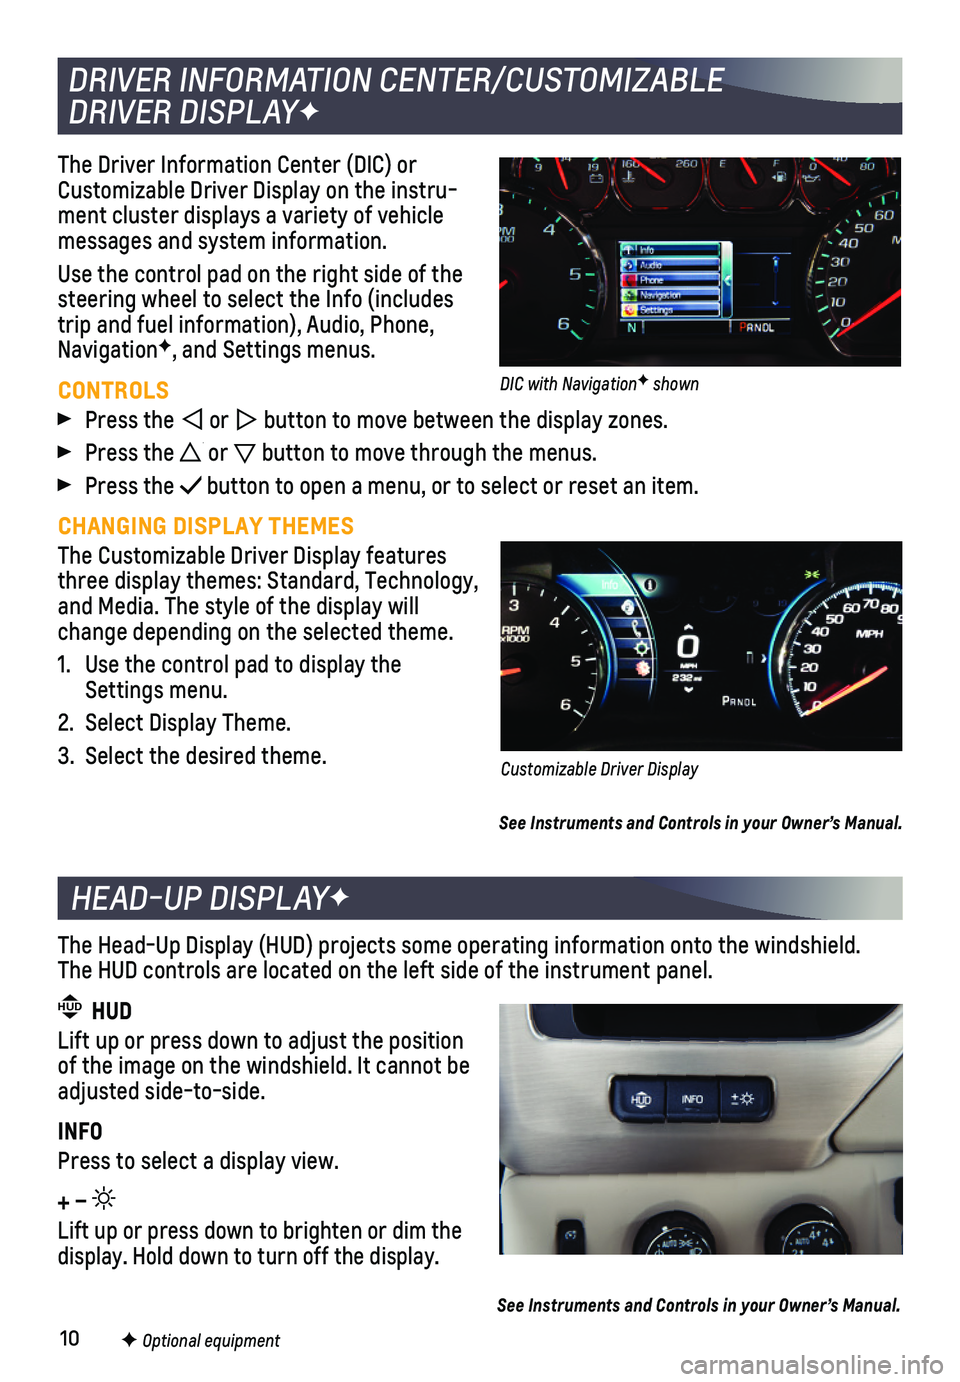 CHEVROLET SUBURBAN 2019  Get To Know Guide 10
The Driver Information Center (DIC) or Customizable Driver Display on the instru-ment cluster displays a variety of vehicle messages and system information.
Use the control pad on the right side of